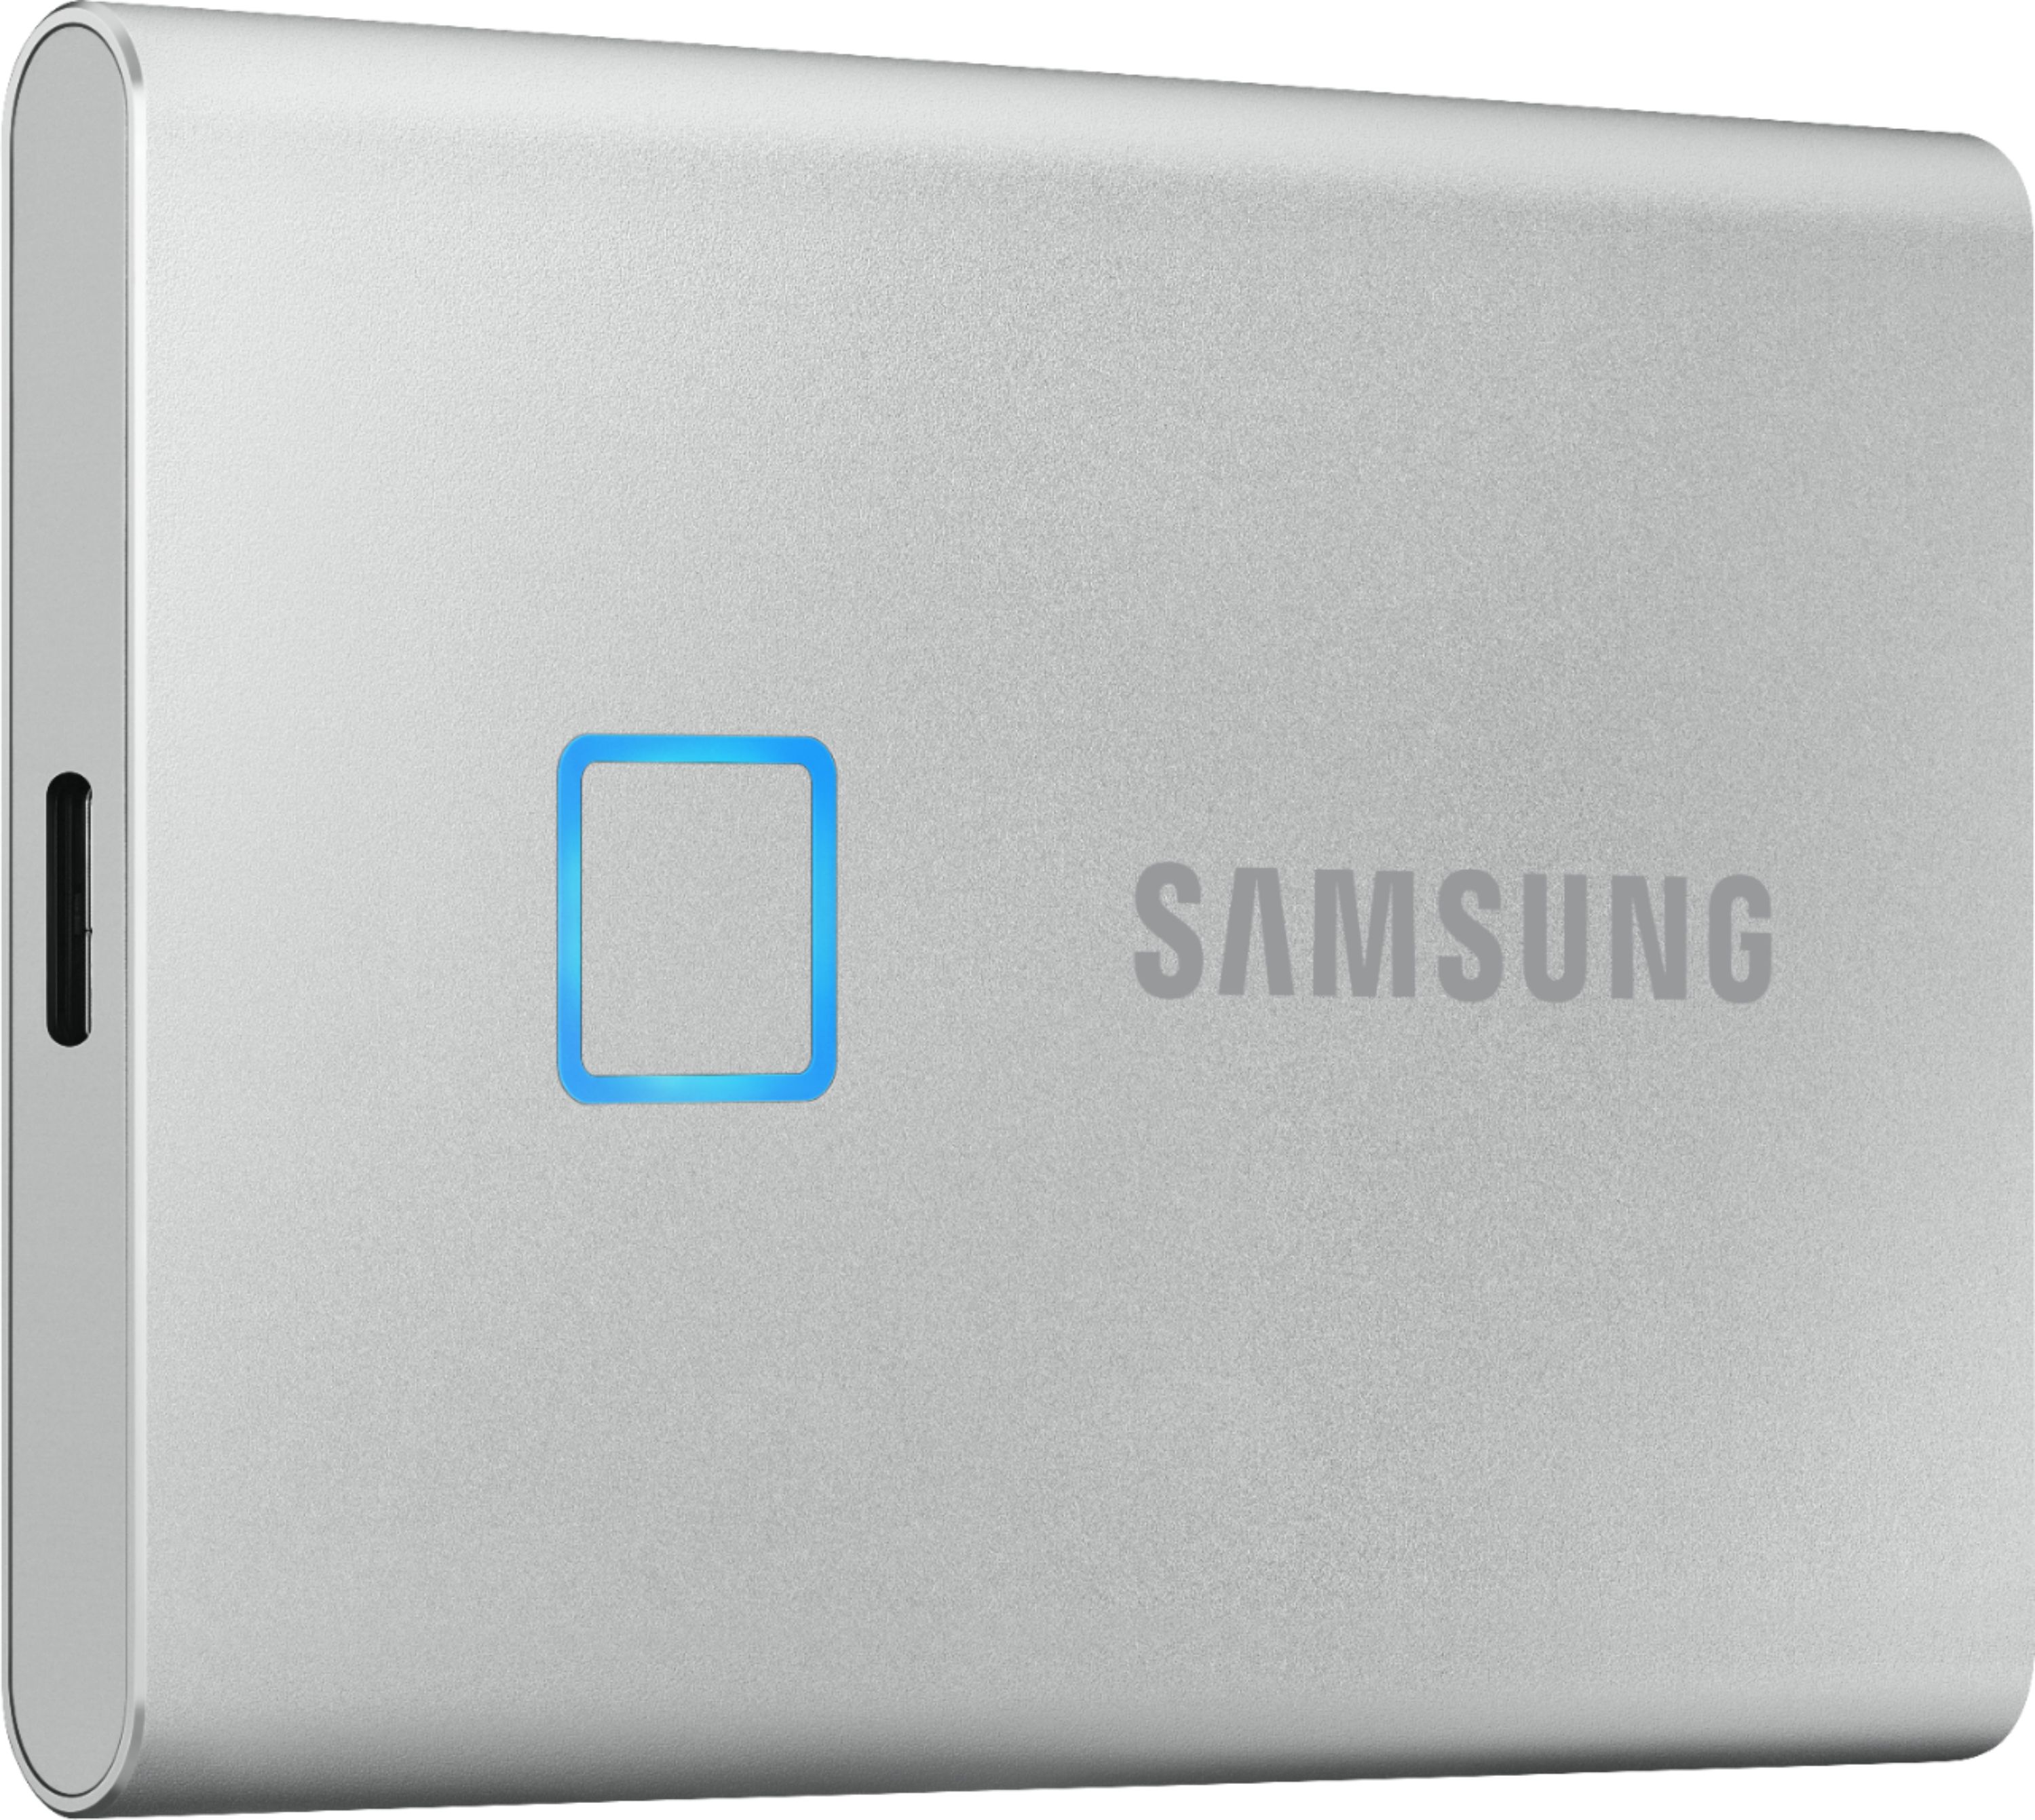 Samsung T7 Touch Portable SSD Review: Fast and Secure Pocketable